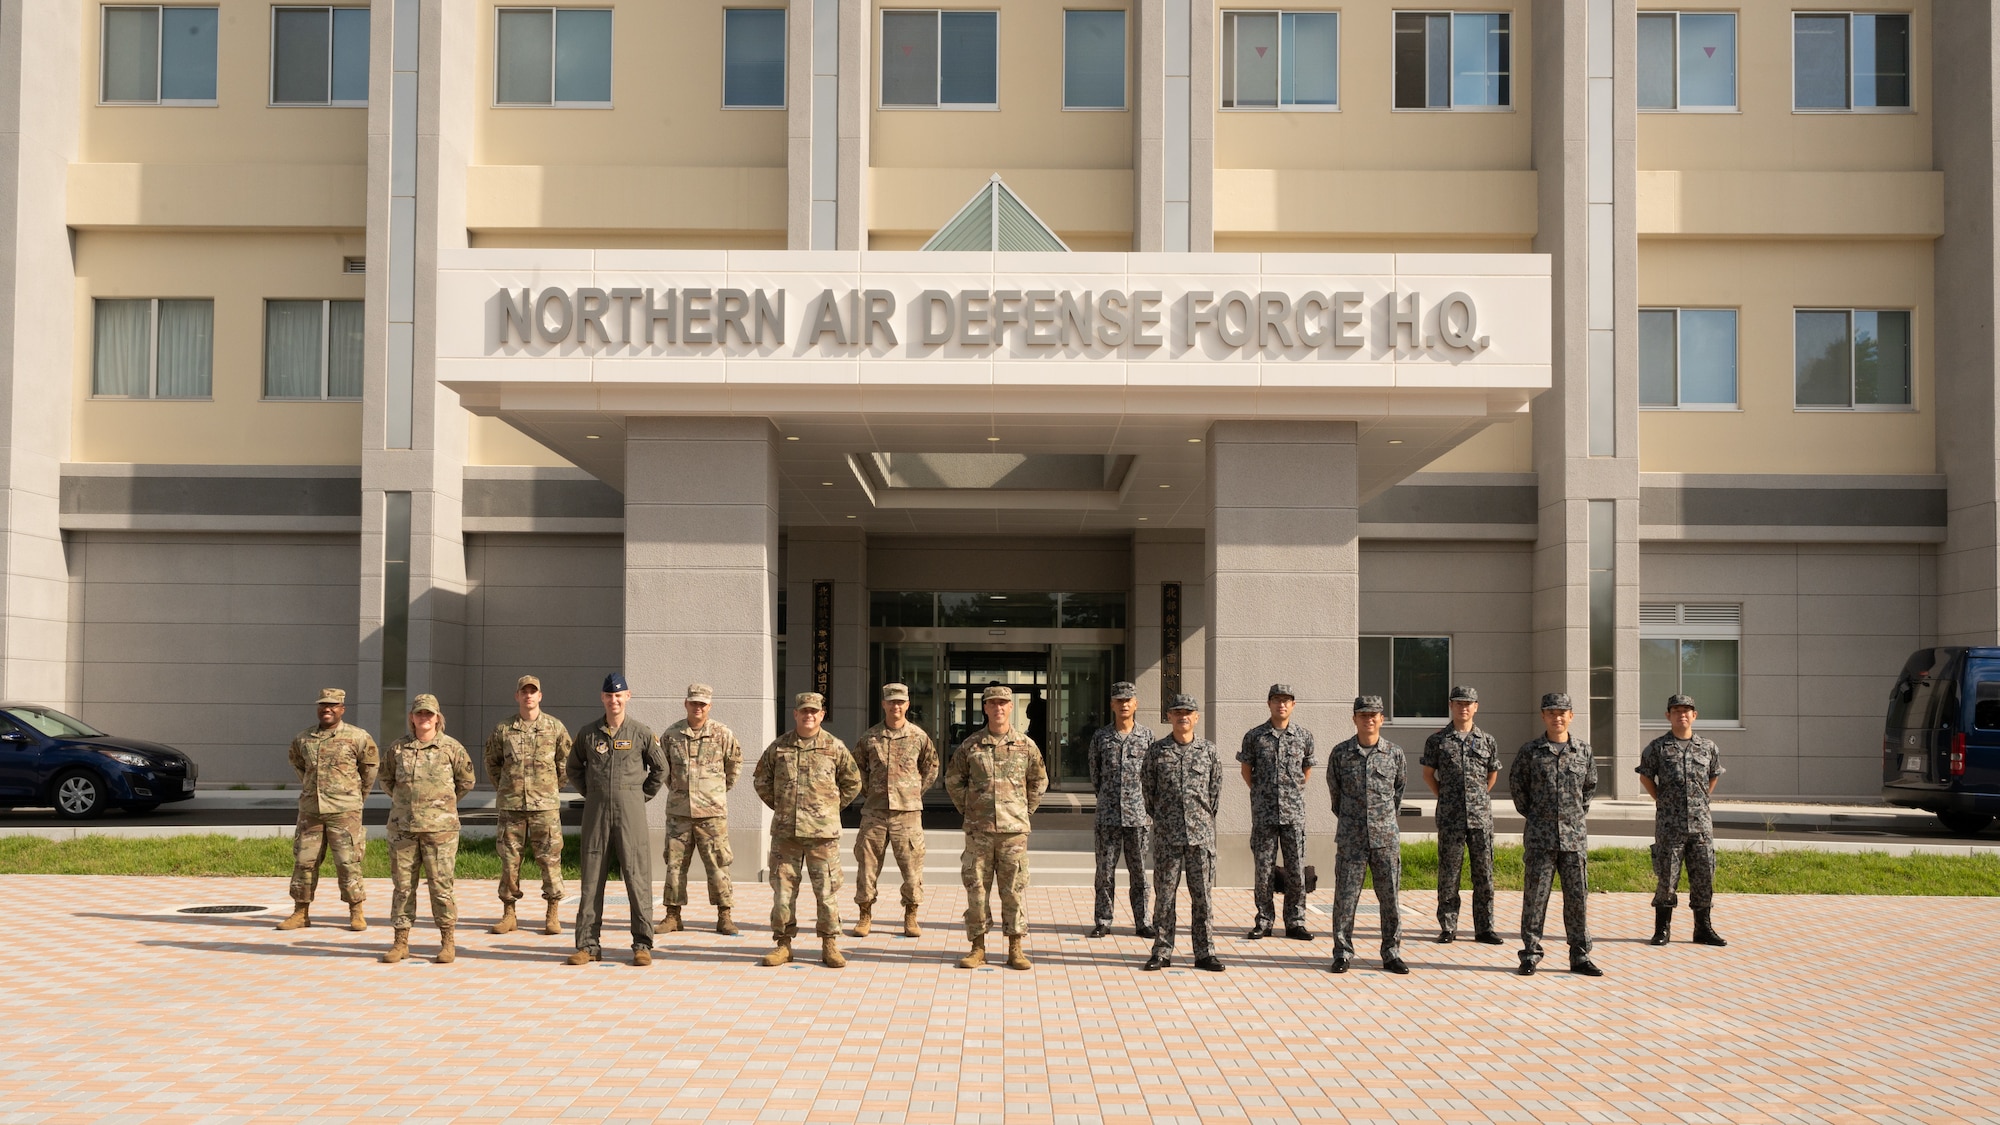 Several uniformed people stand in formation in front of a building that reads: Northern Air Defense Force H.Q.